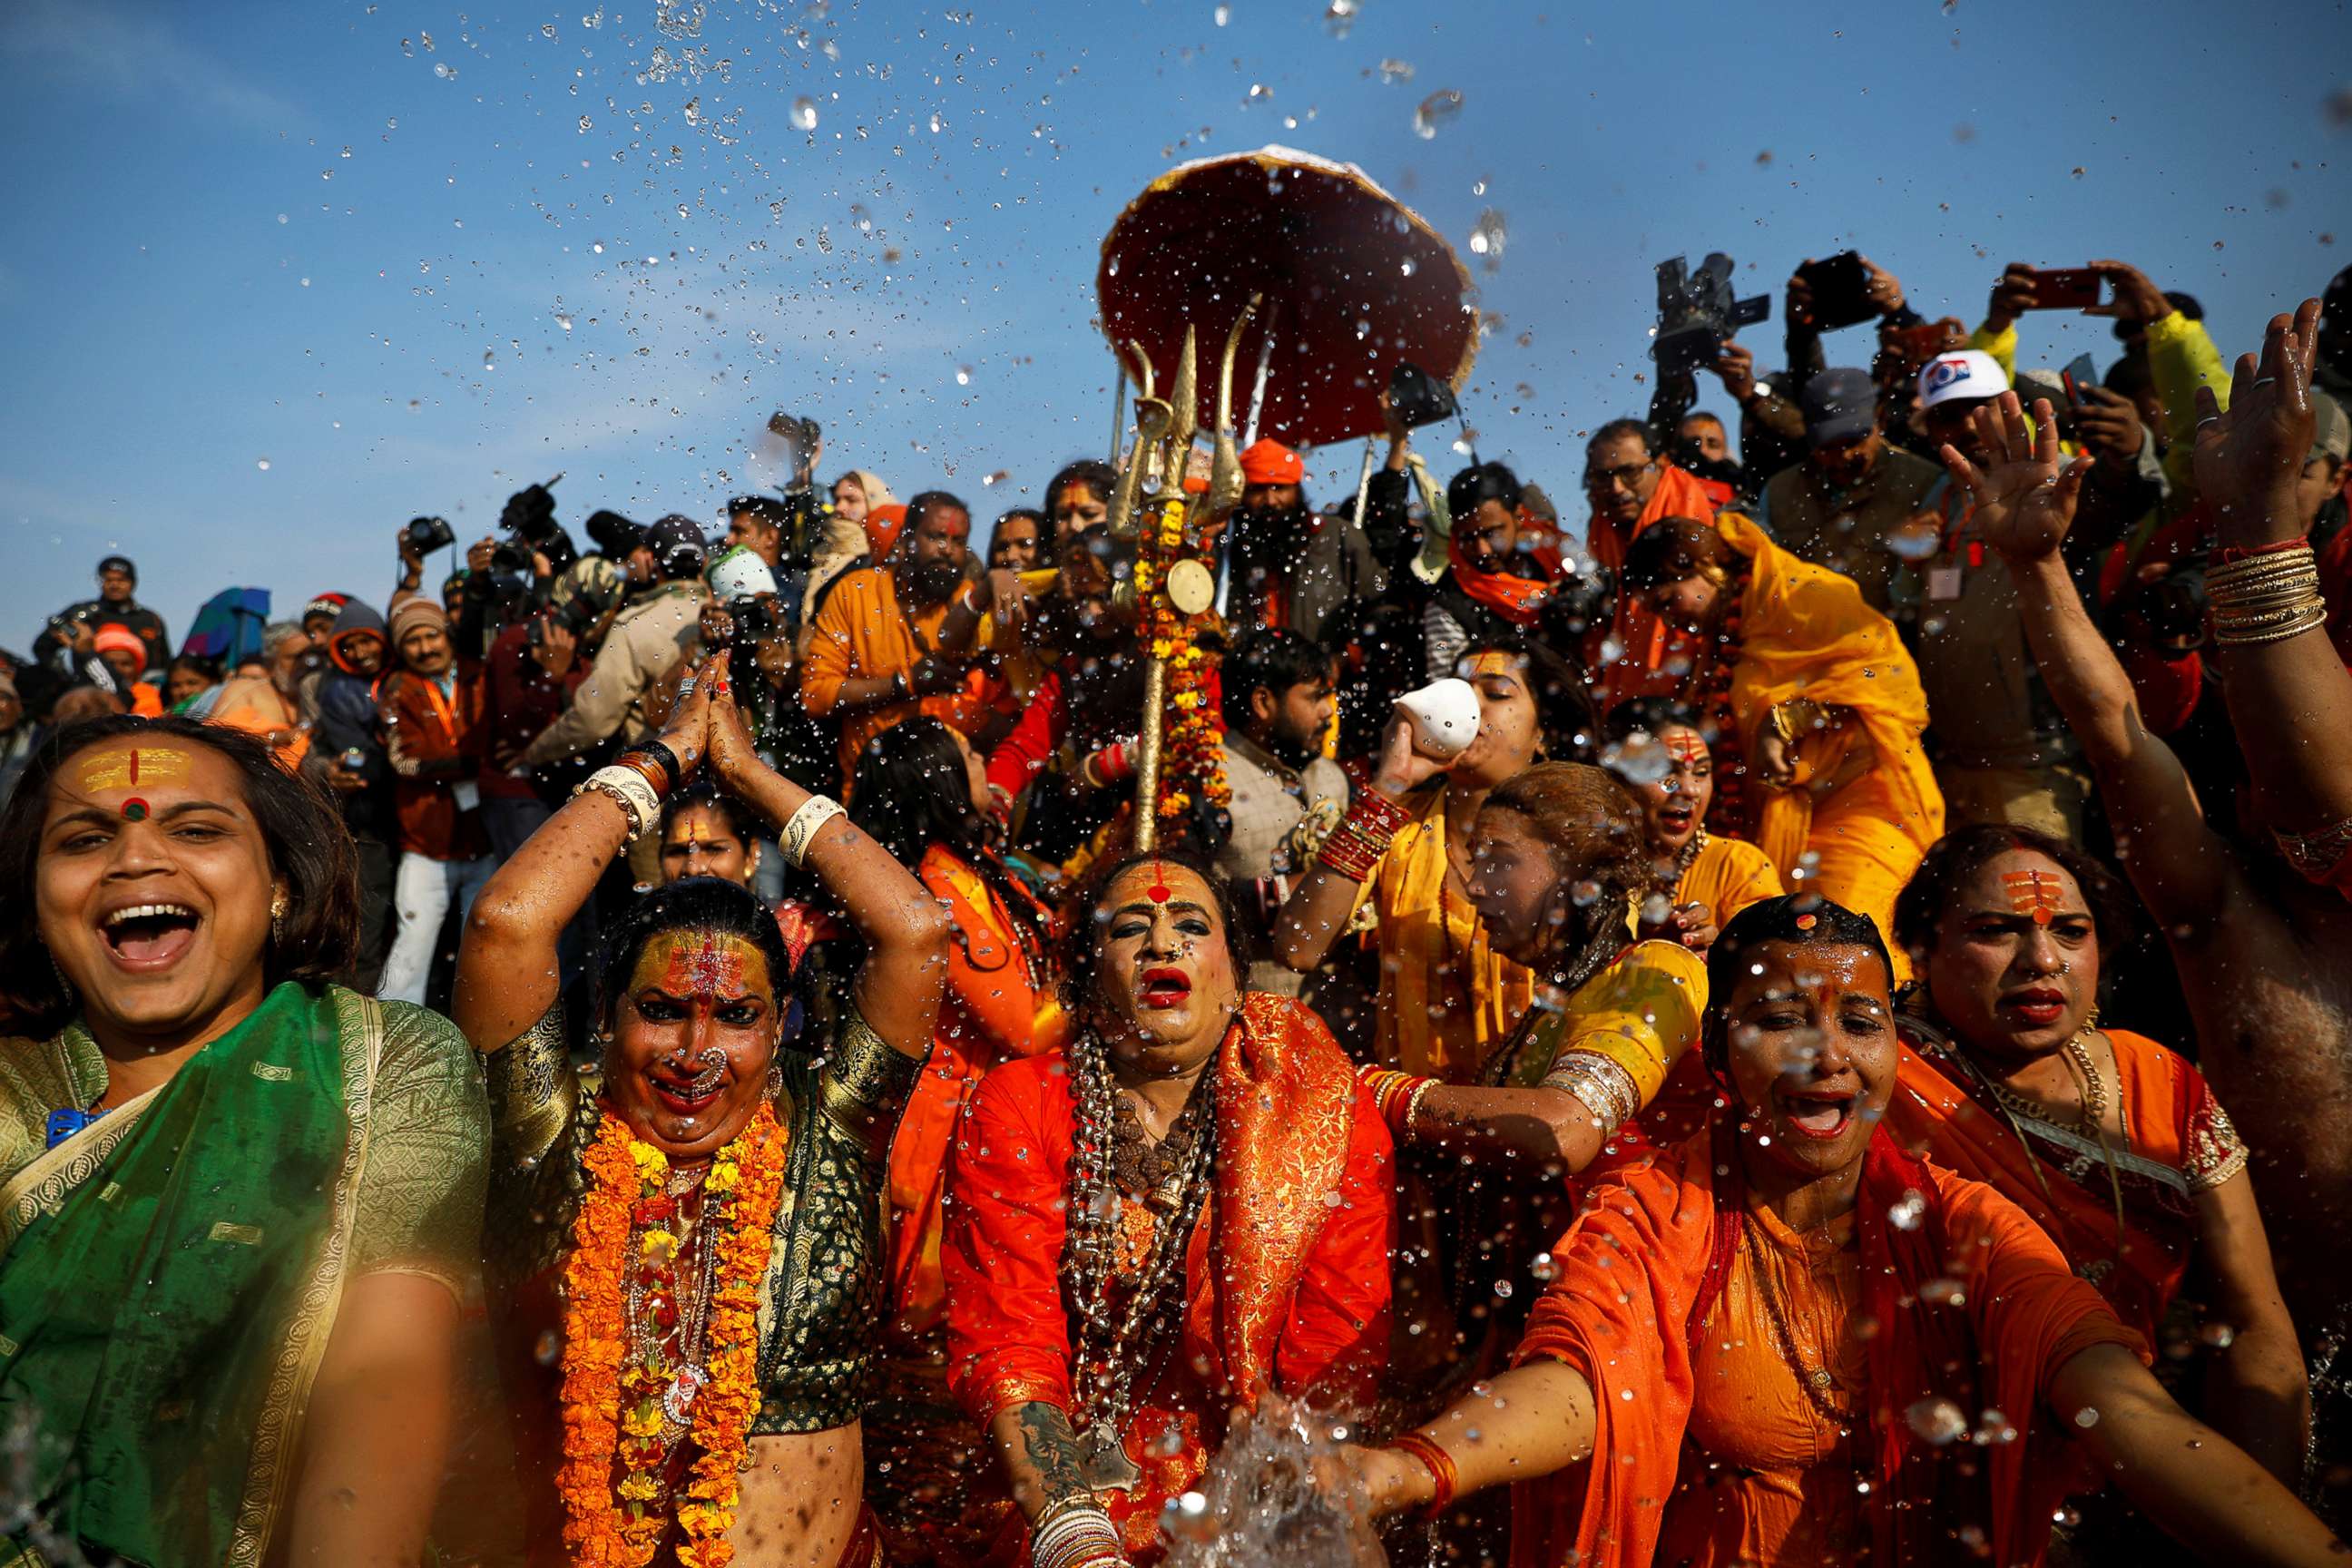 Lakshmi Narayan Tripathi, chief of the "Kinnar Akhada" congregation for transgender people and other members take a dip during the first "Shahi Snan" at "Kumbh Mela" or the Pitcher Festival, in India, Jan. 15, 2019.